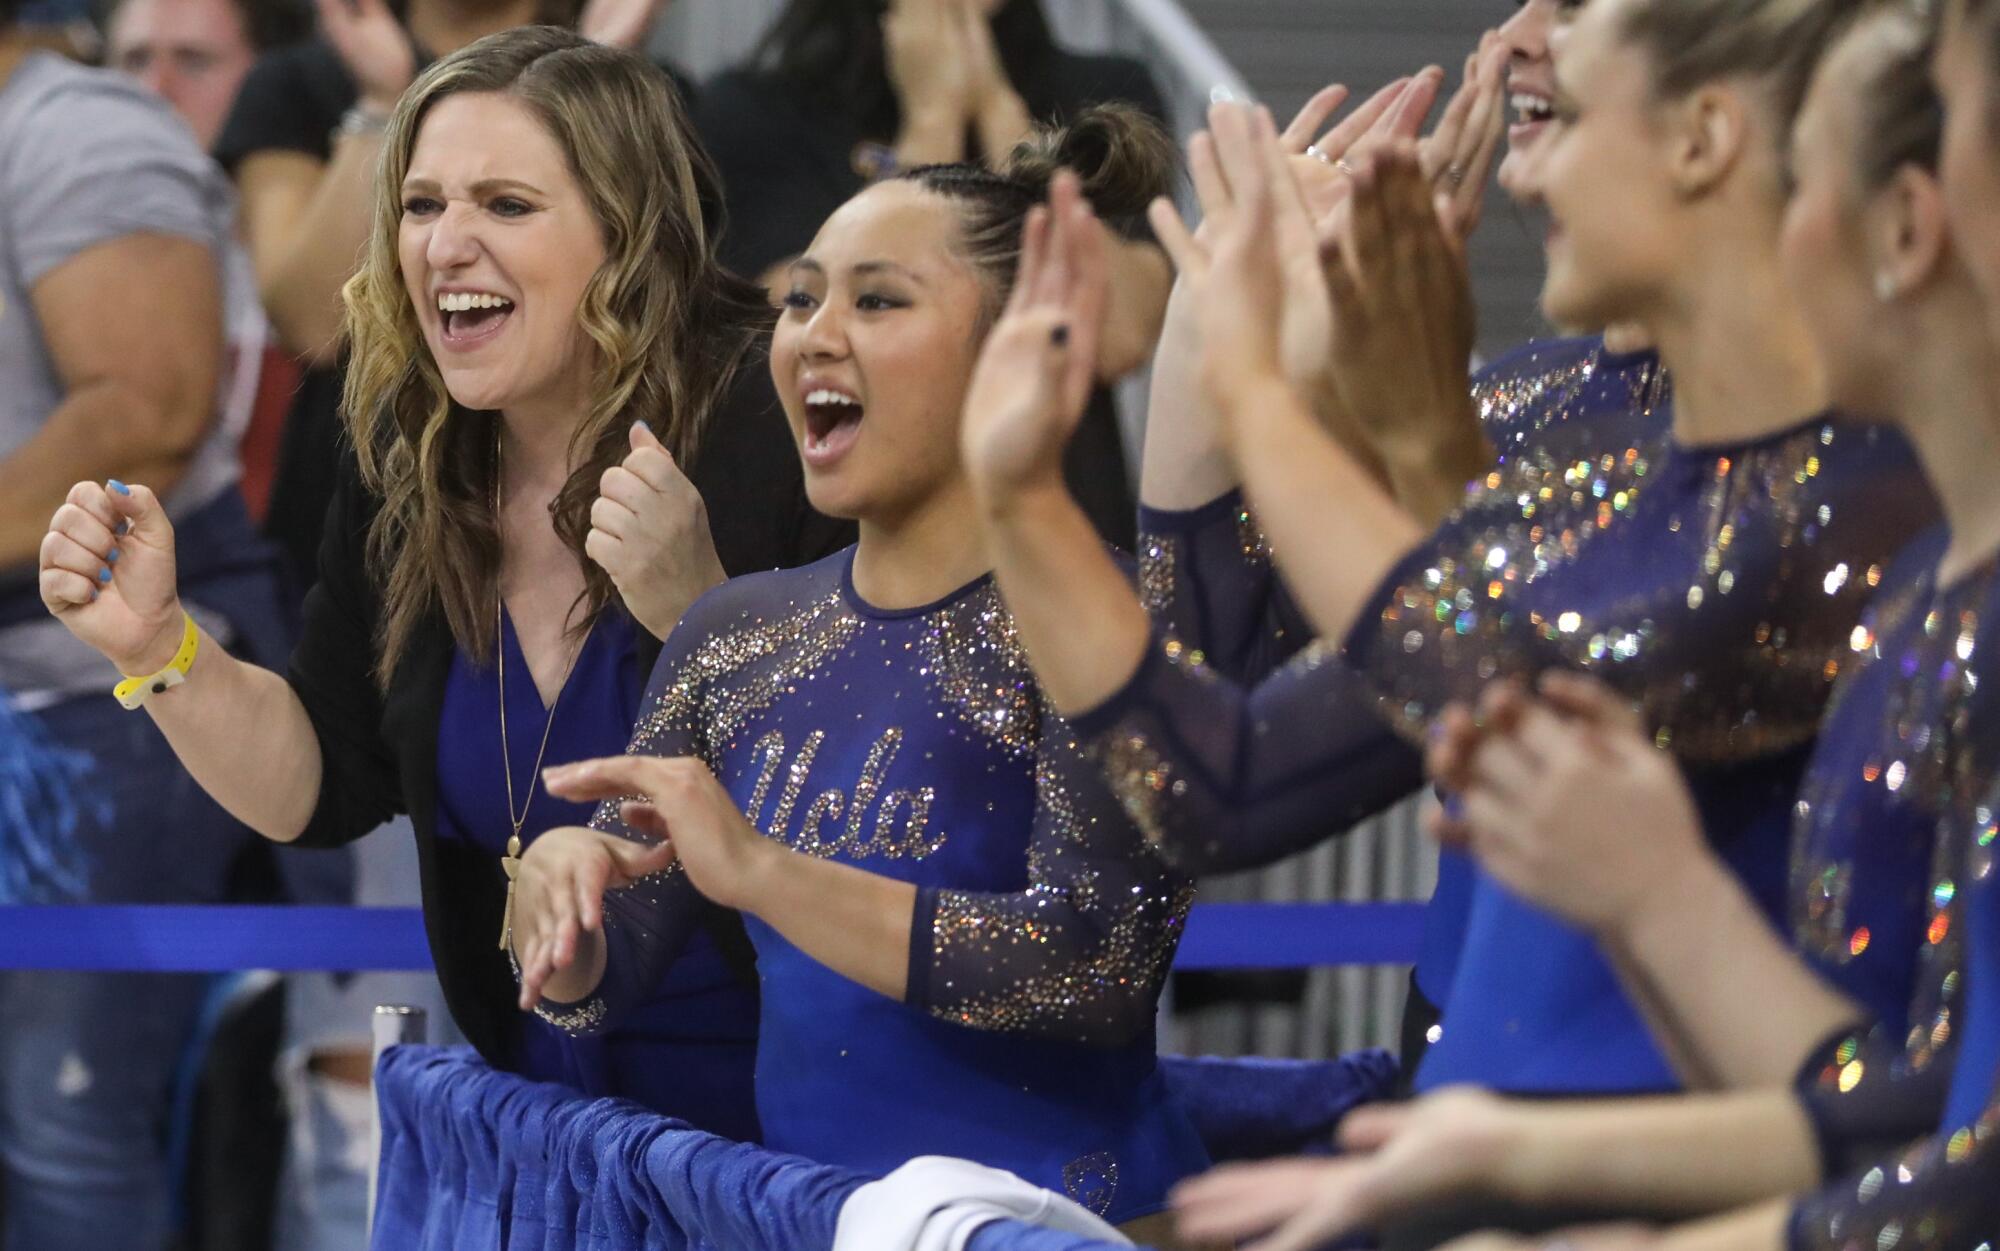  Janelle McDonald UCLA gymnastics coach celebrates with her team as they compete at NCAA regional in Los Angeles